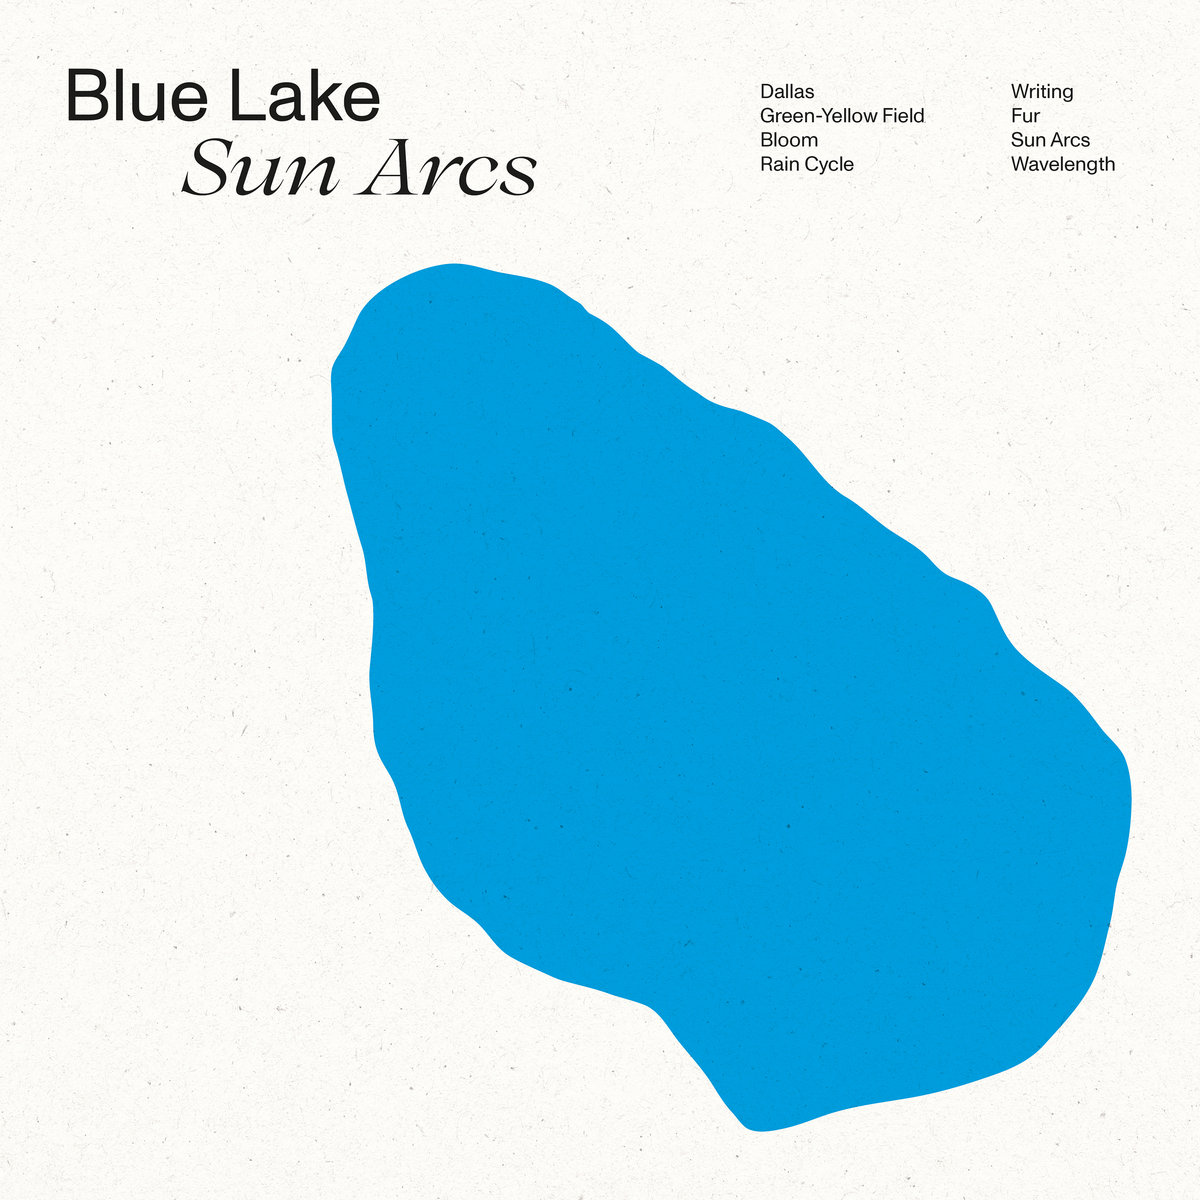 The album artwork for the Blue Lakes album Sun Arcs is a blue blob on an off-white background that appropriately looks like a lake